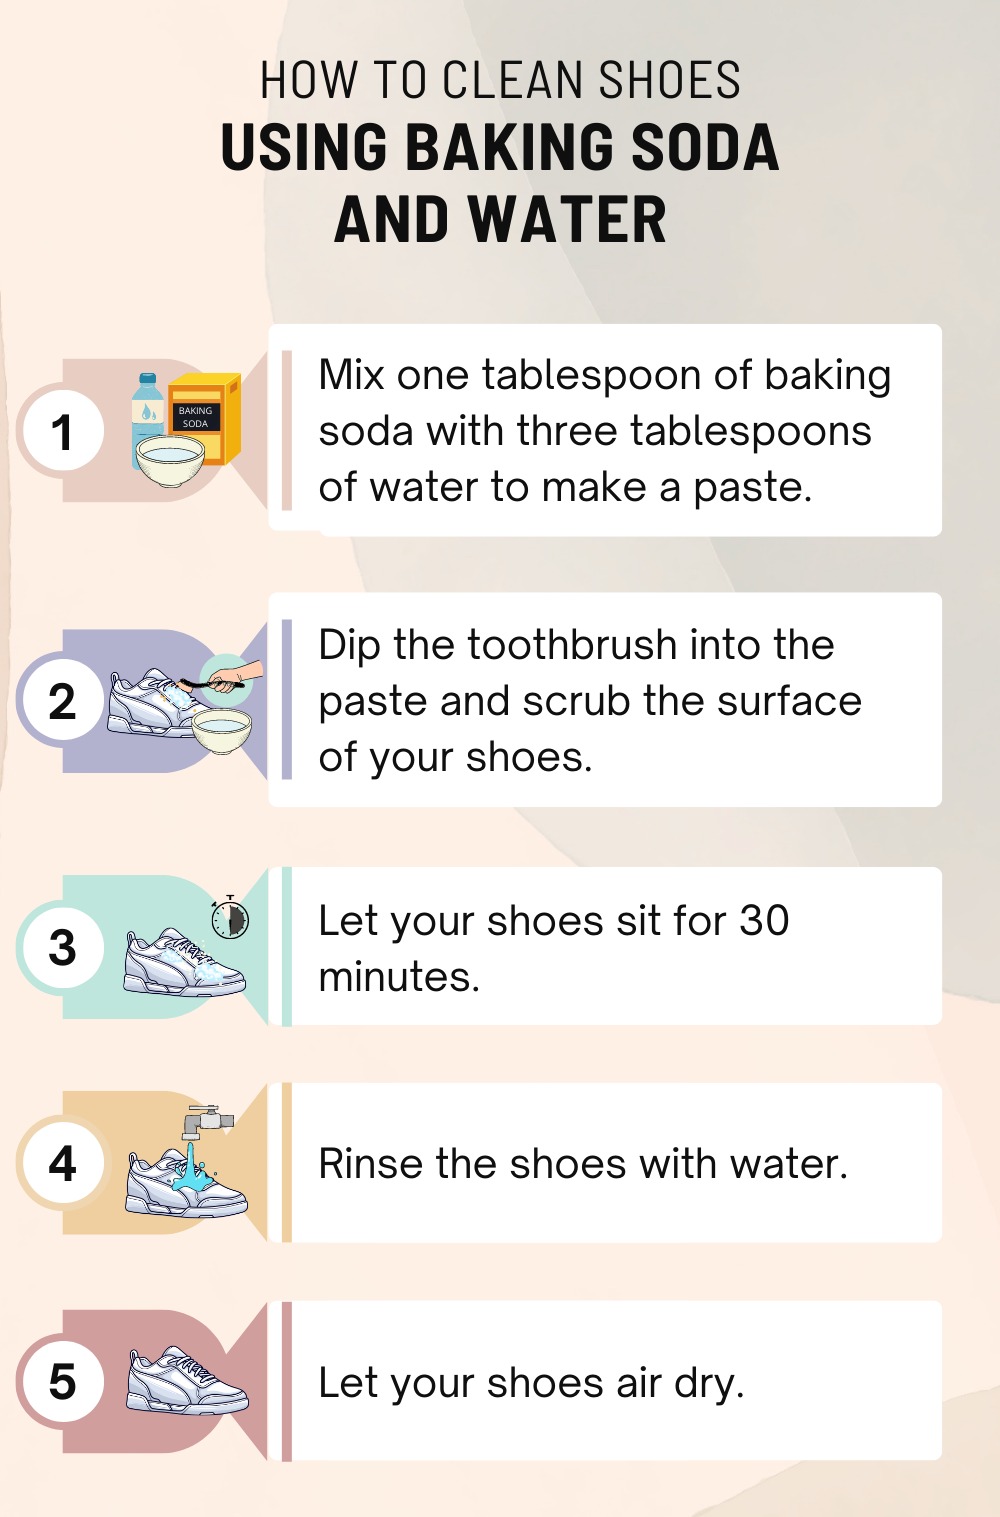 How To Clean Shoes With Baking Soda - 4 Amazing Methods - Do it Our Way